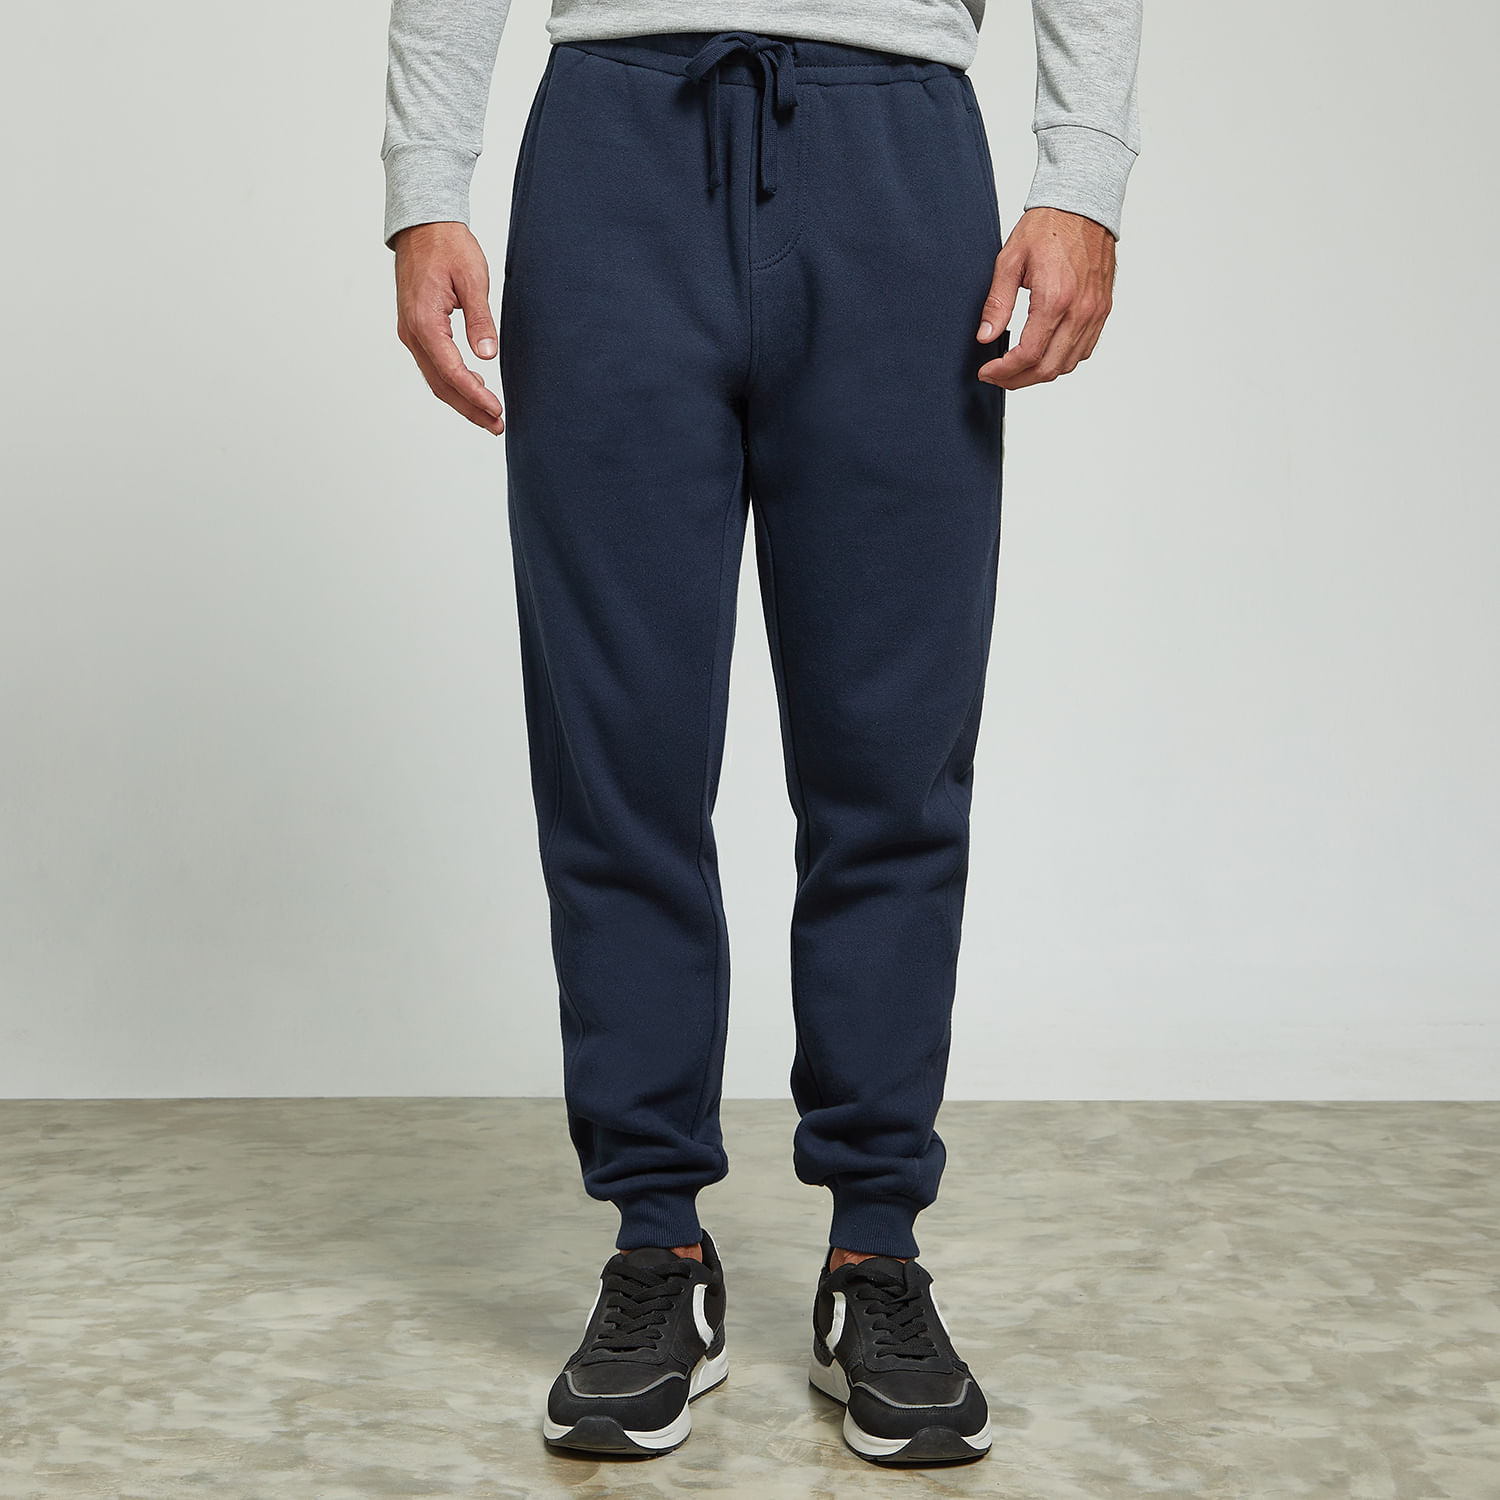 Jogger Aereal Tape Hombre